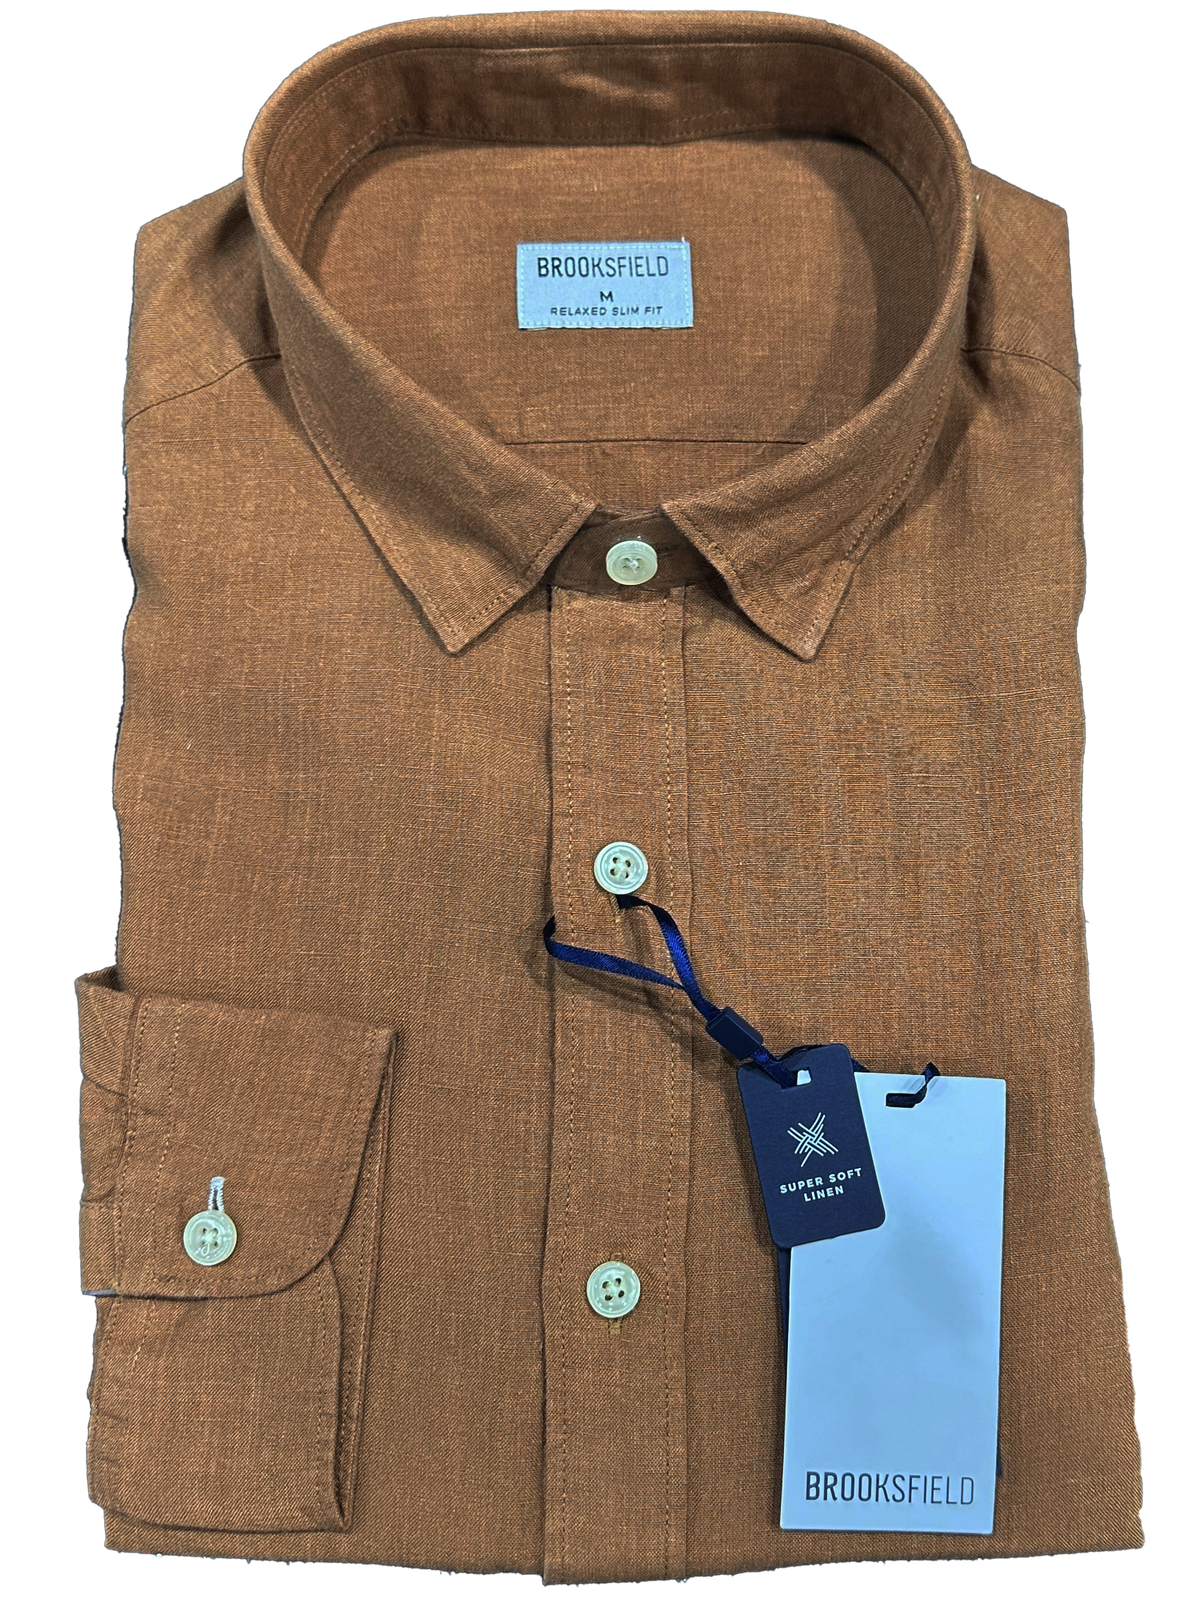 BFS1042 -Casual Linen Blend Shirt L/S  https://harrysformenswear.com.au/products/bfs1042-casual-linen-blend-shirt-l-s  Brookfield Luxe shirts are meticulously made using the finest fabrications and highest quality workmanship. The look is modern and sophisticated with a luxurious touch, creating confidence in wear by being impeccably dressed in every situation. Our fits are tailored to the perfect cut for today's professional man. Feat…